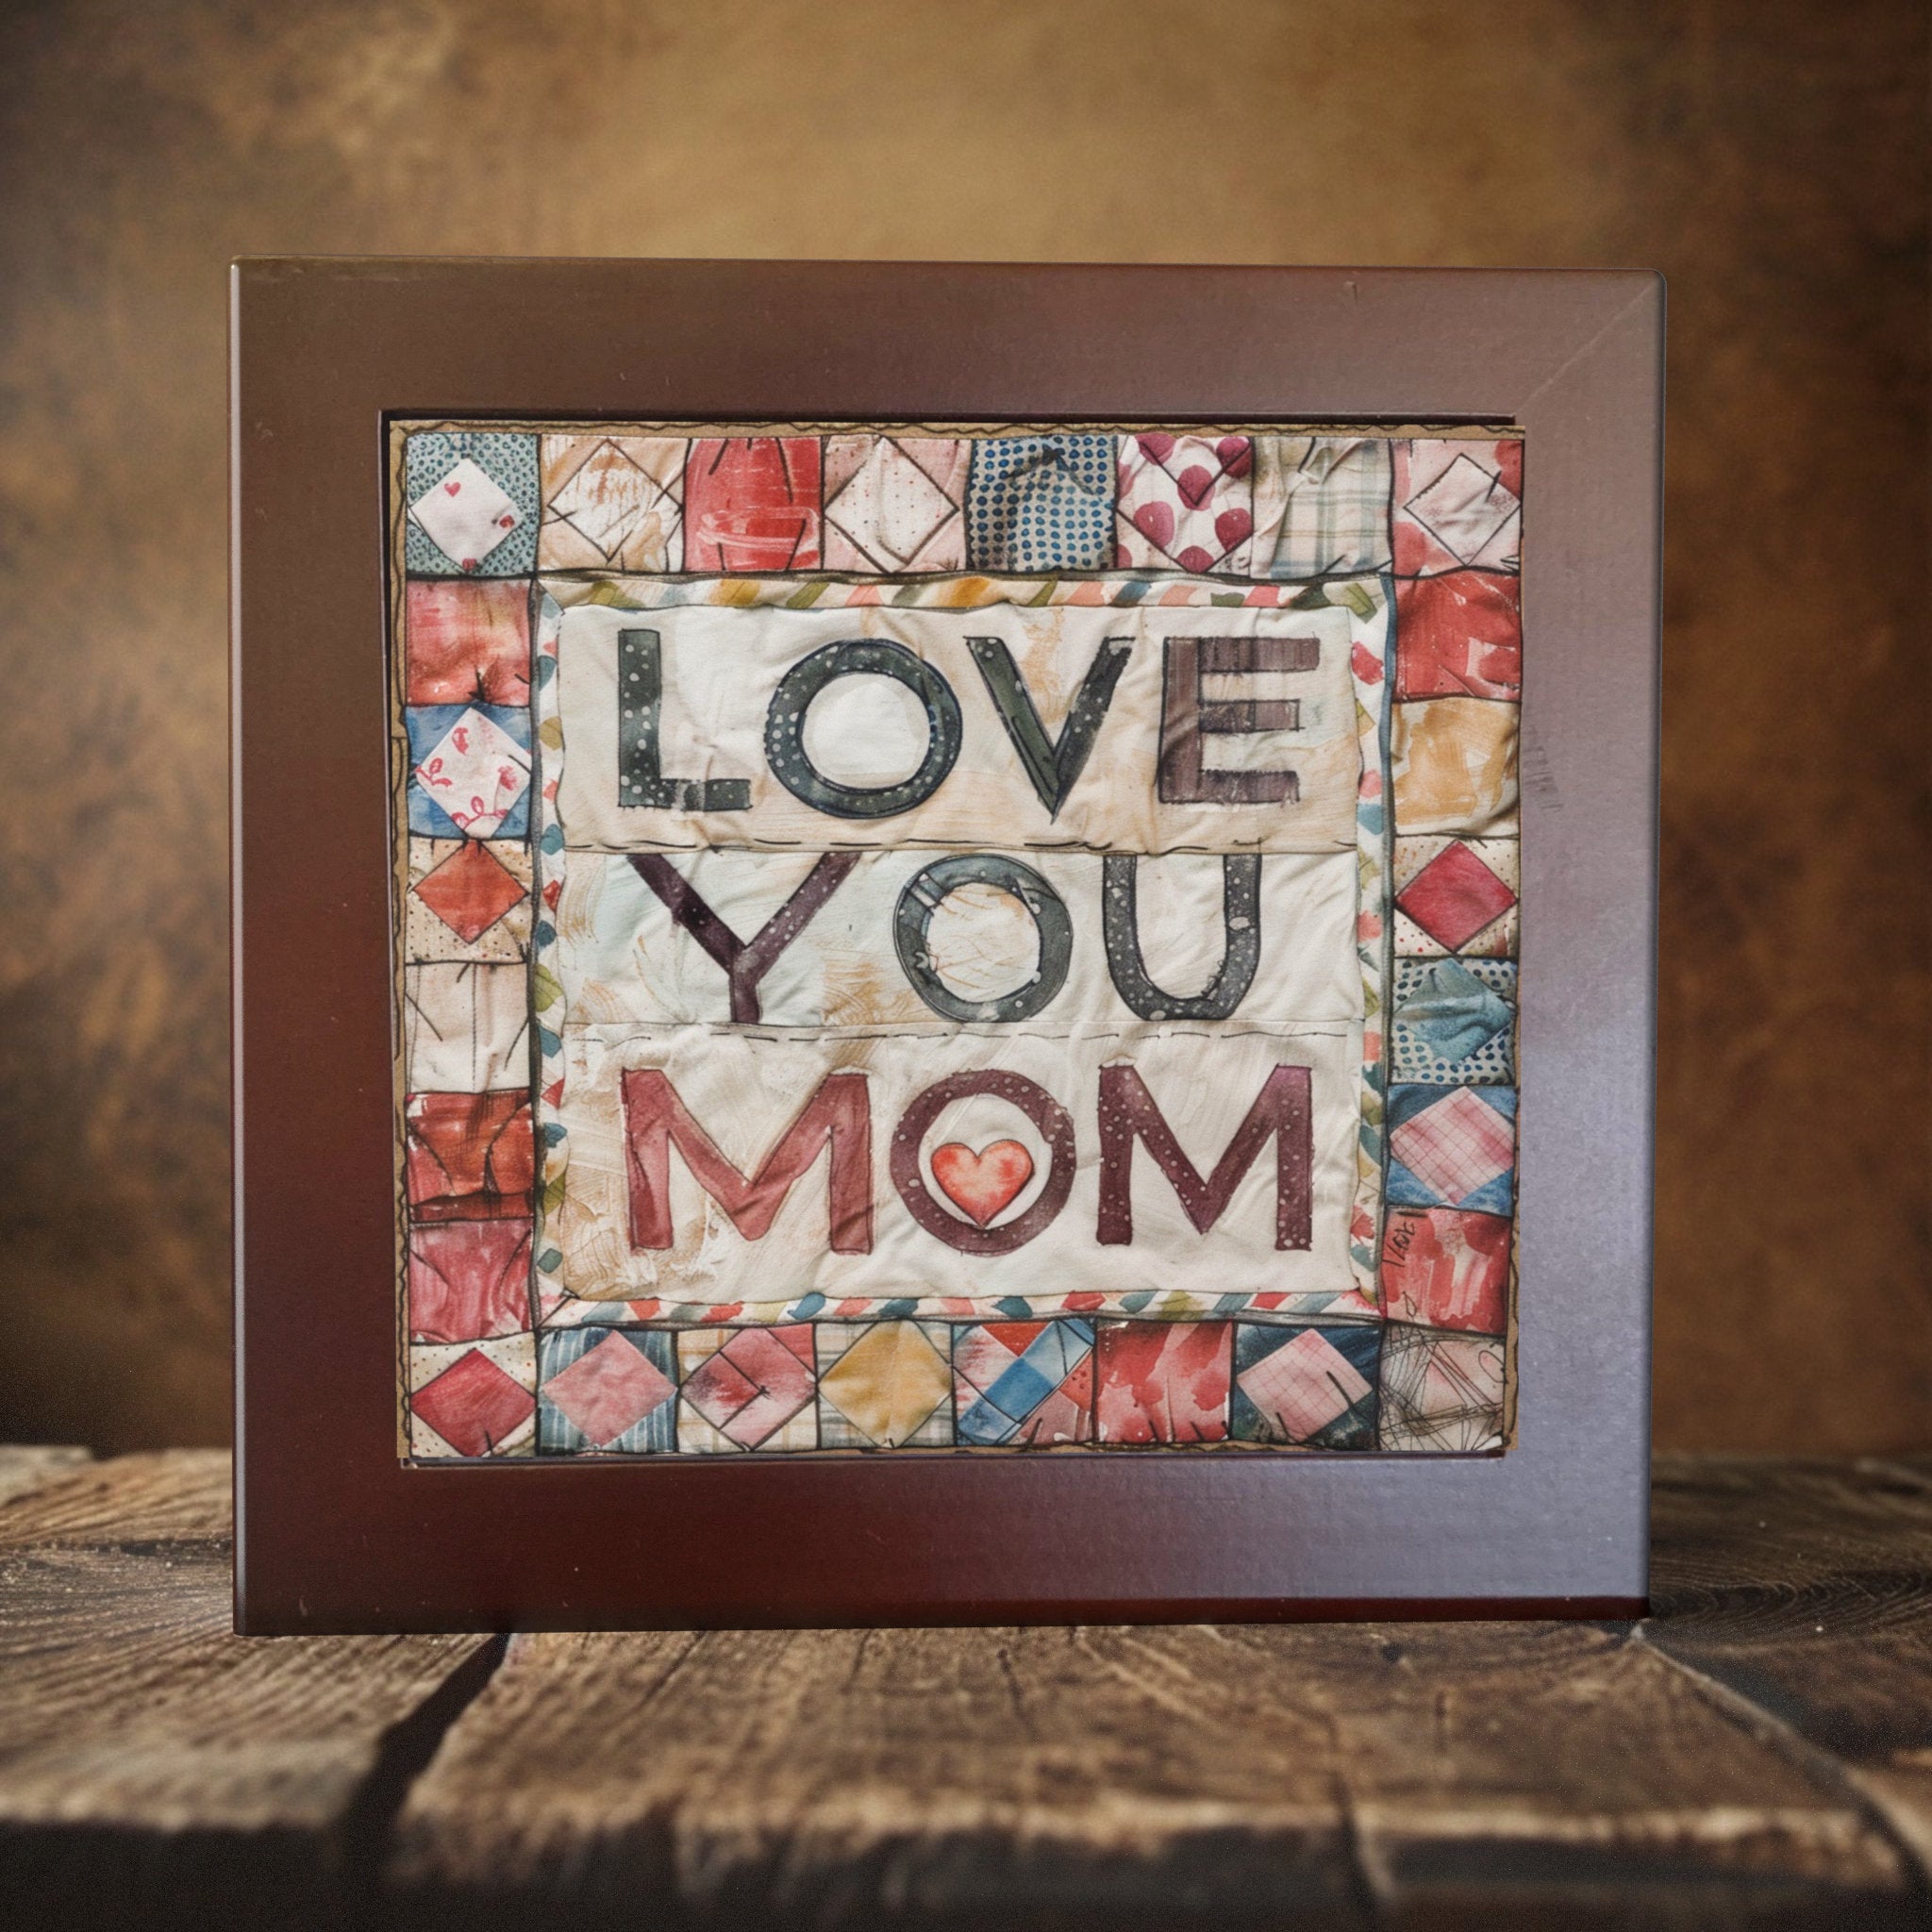 Patchwork Heart - Rustic Quilt Inspired Love You Mom Art Tile